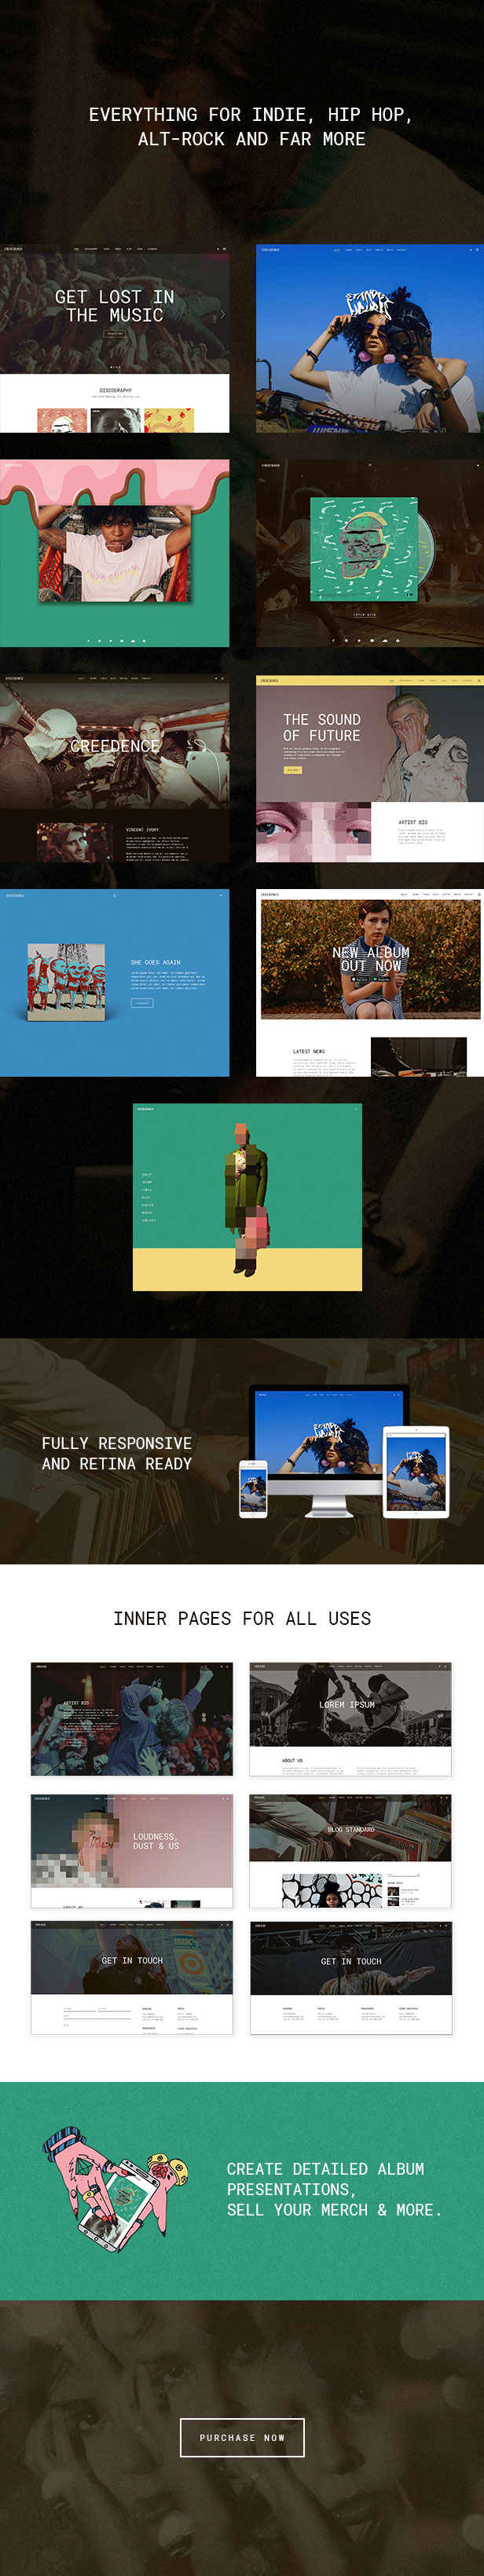 WordPress theme Creedence - An Alternative Music Theme for Bands and Labels (Music and Bands)